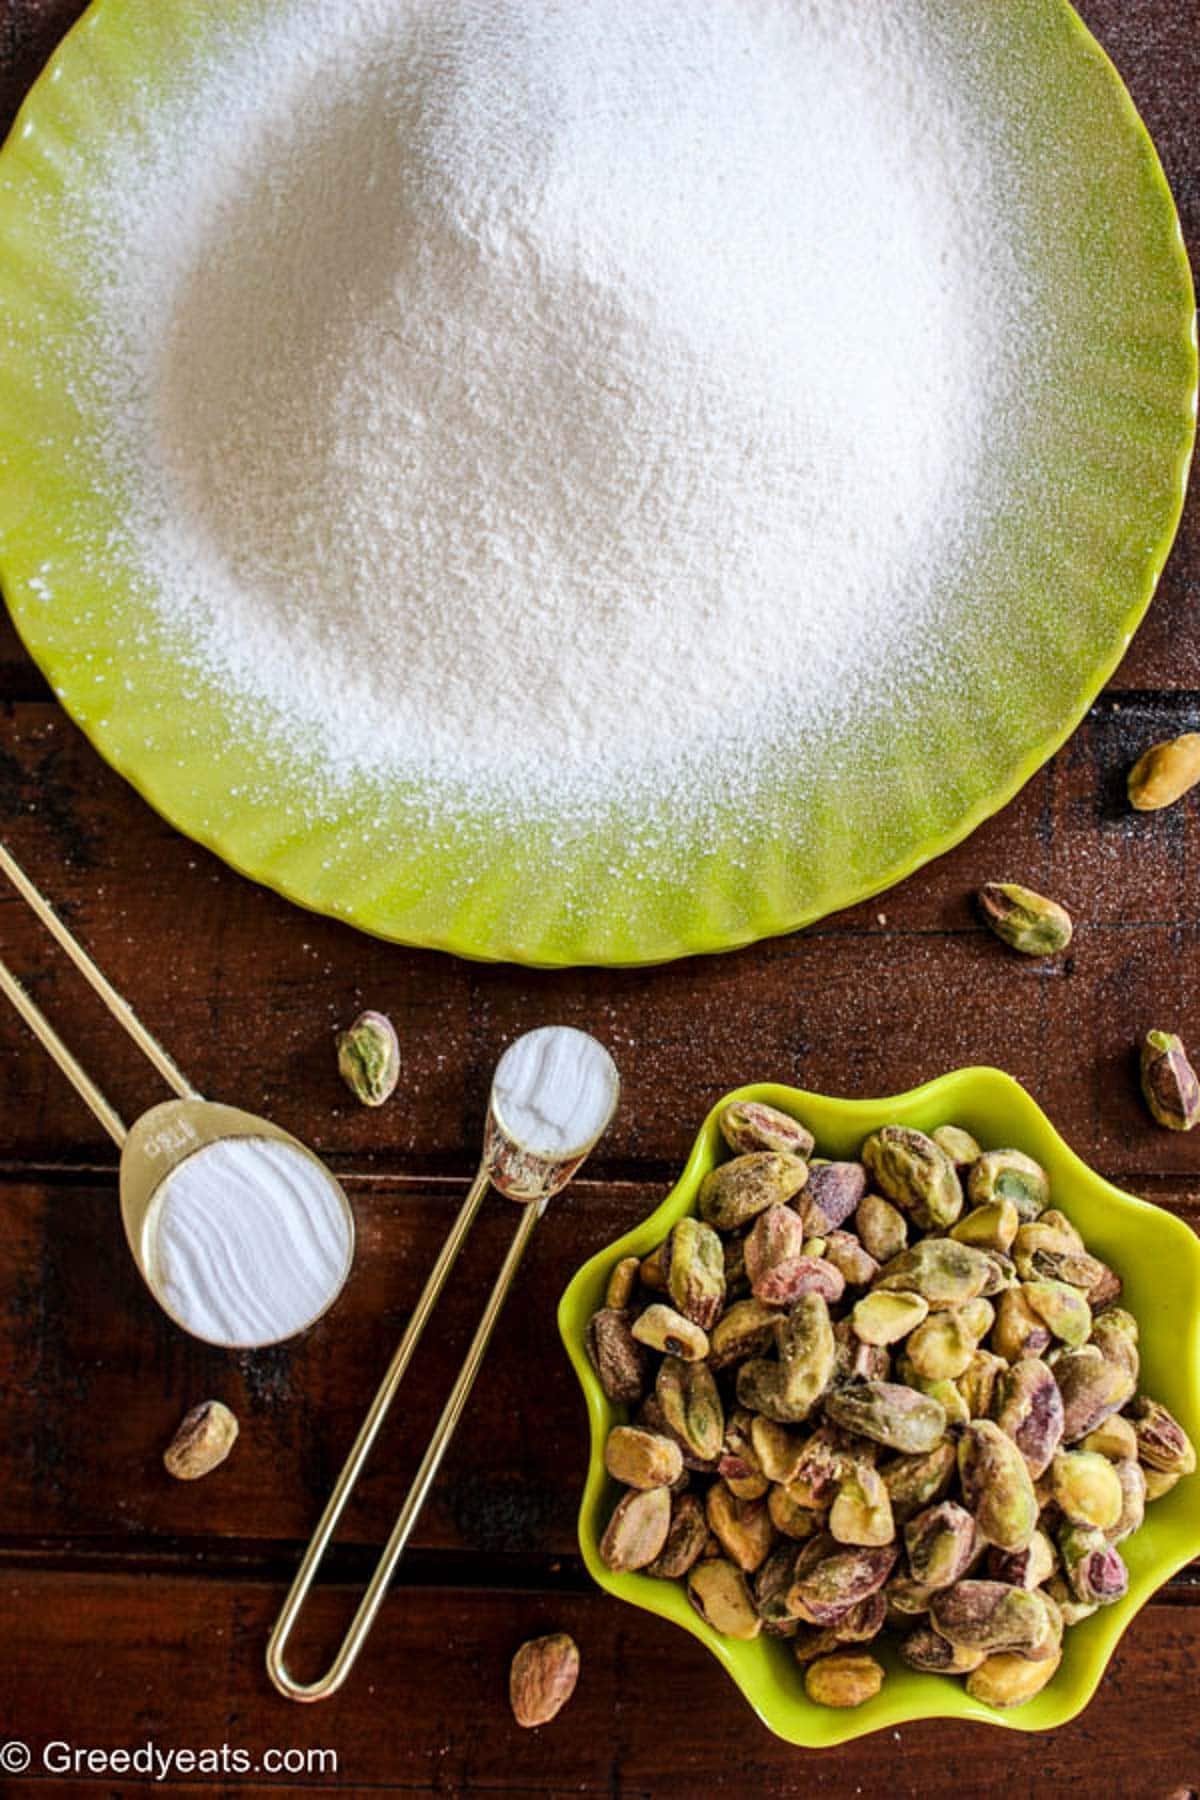 Ingredients like cake flour, leaveners and pistachios required to make cake batter.